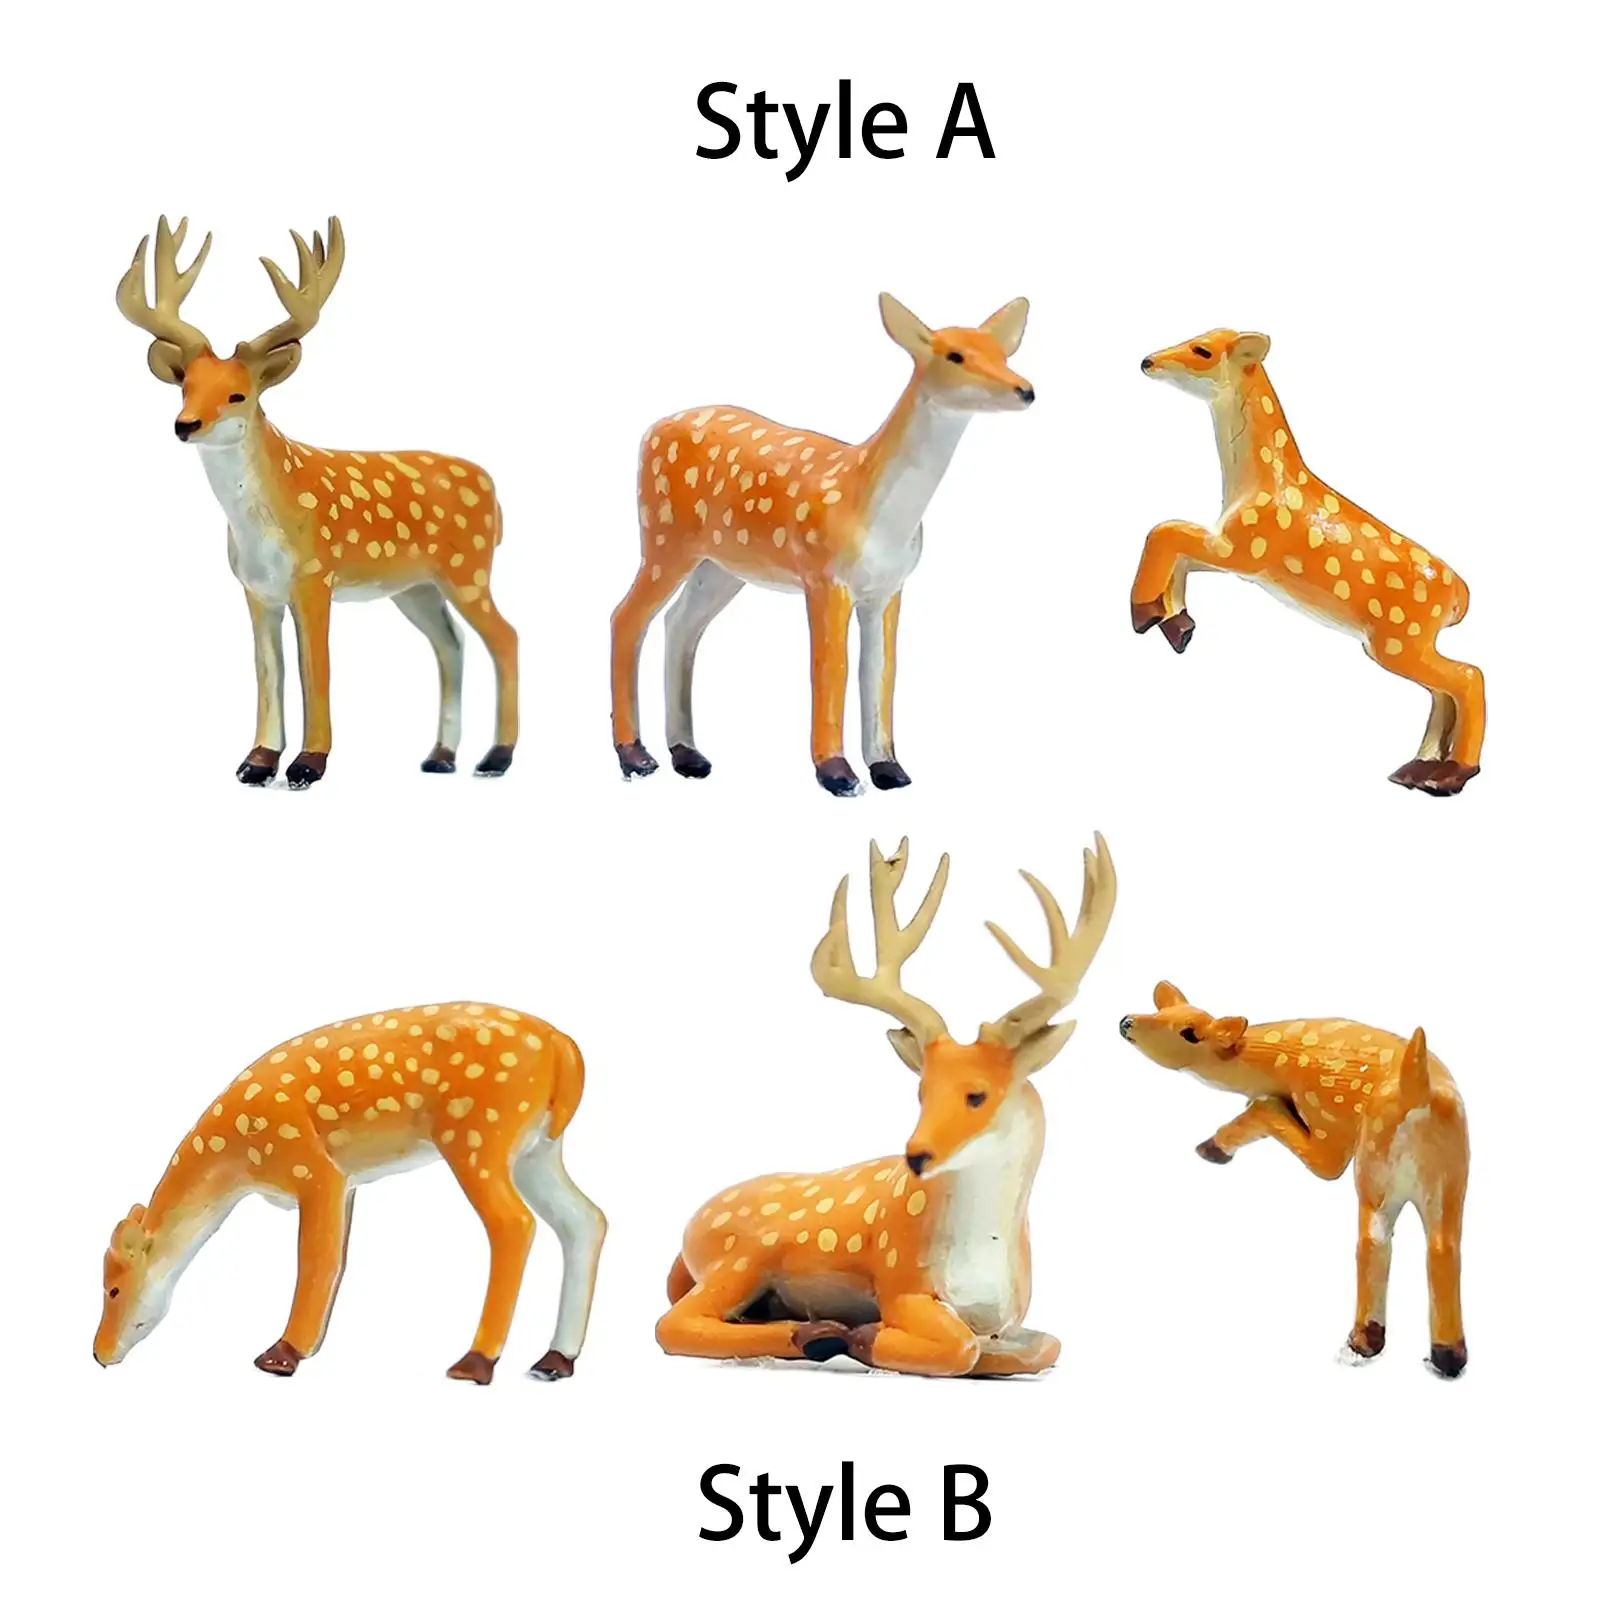 3x 1:64 Miniature Statue Collection Party Supplies Resin small deer Figurines for Sand Table Decoration Crafts Projects Decor